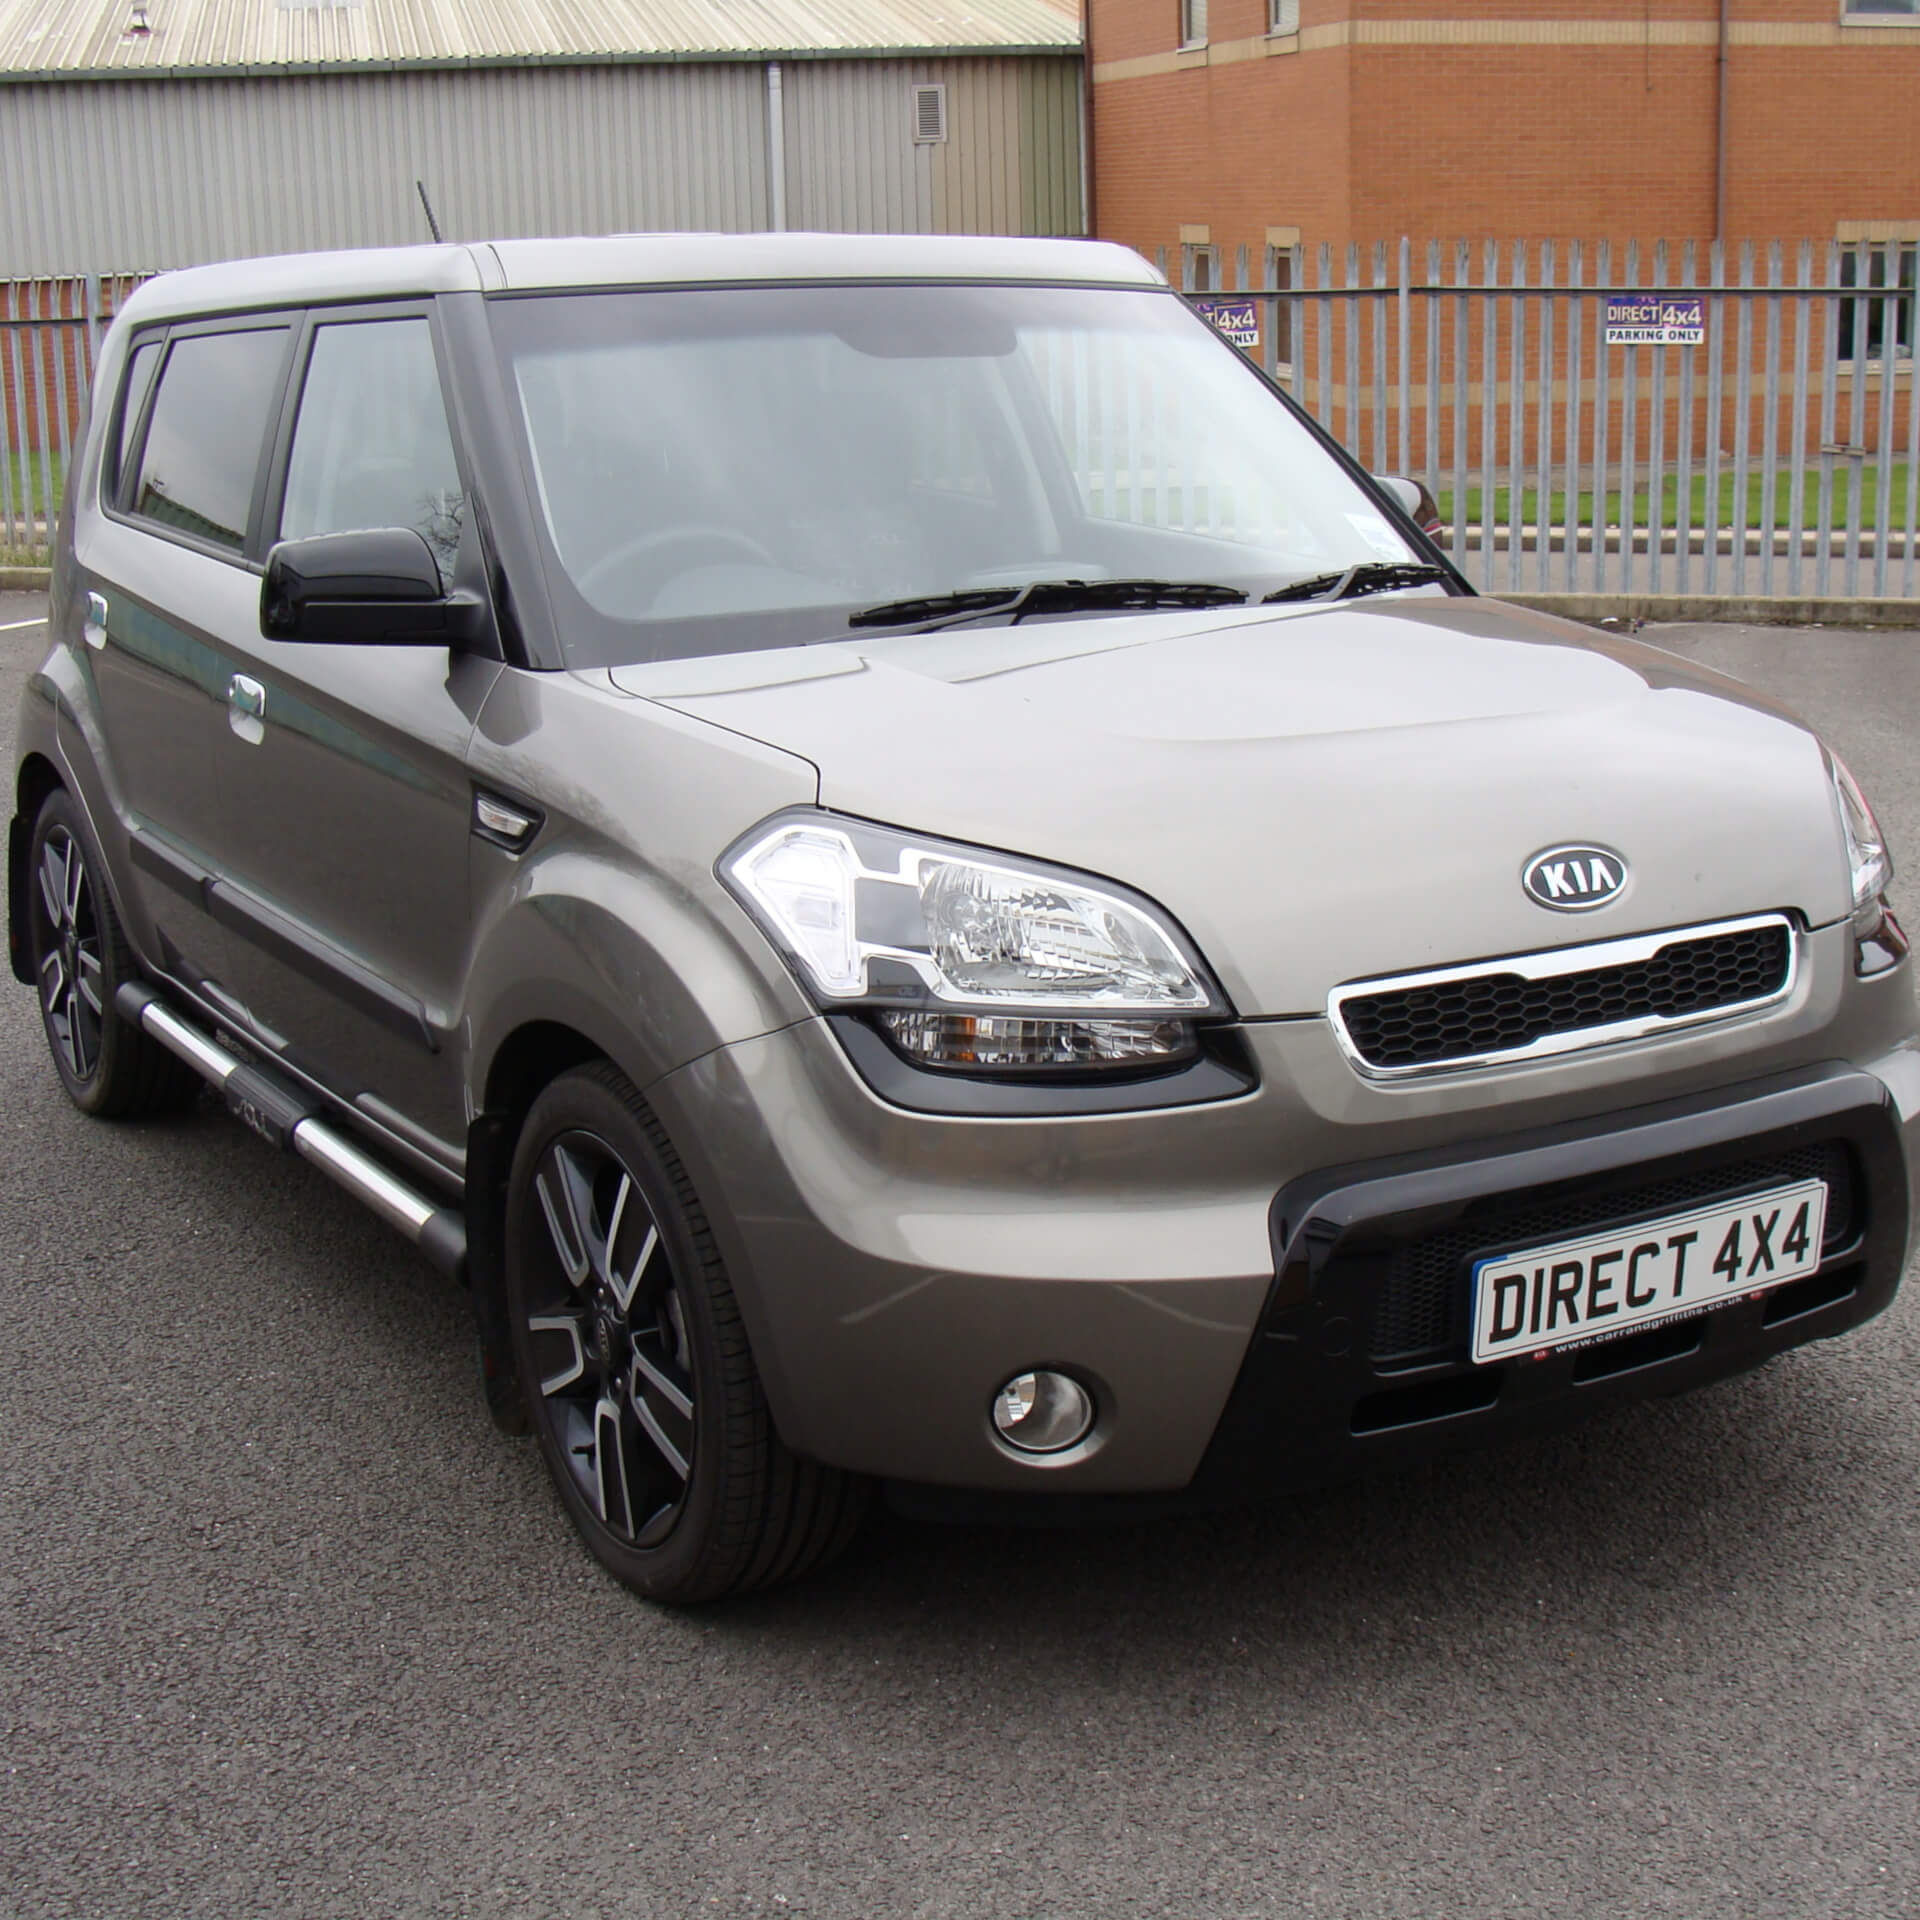 Direct4x4 accessories for Kia Soul vehicles with a photo of a Kia Soul parked outside our office